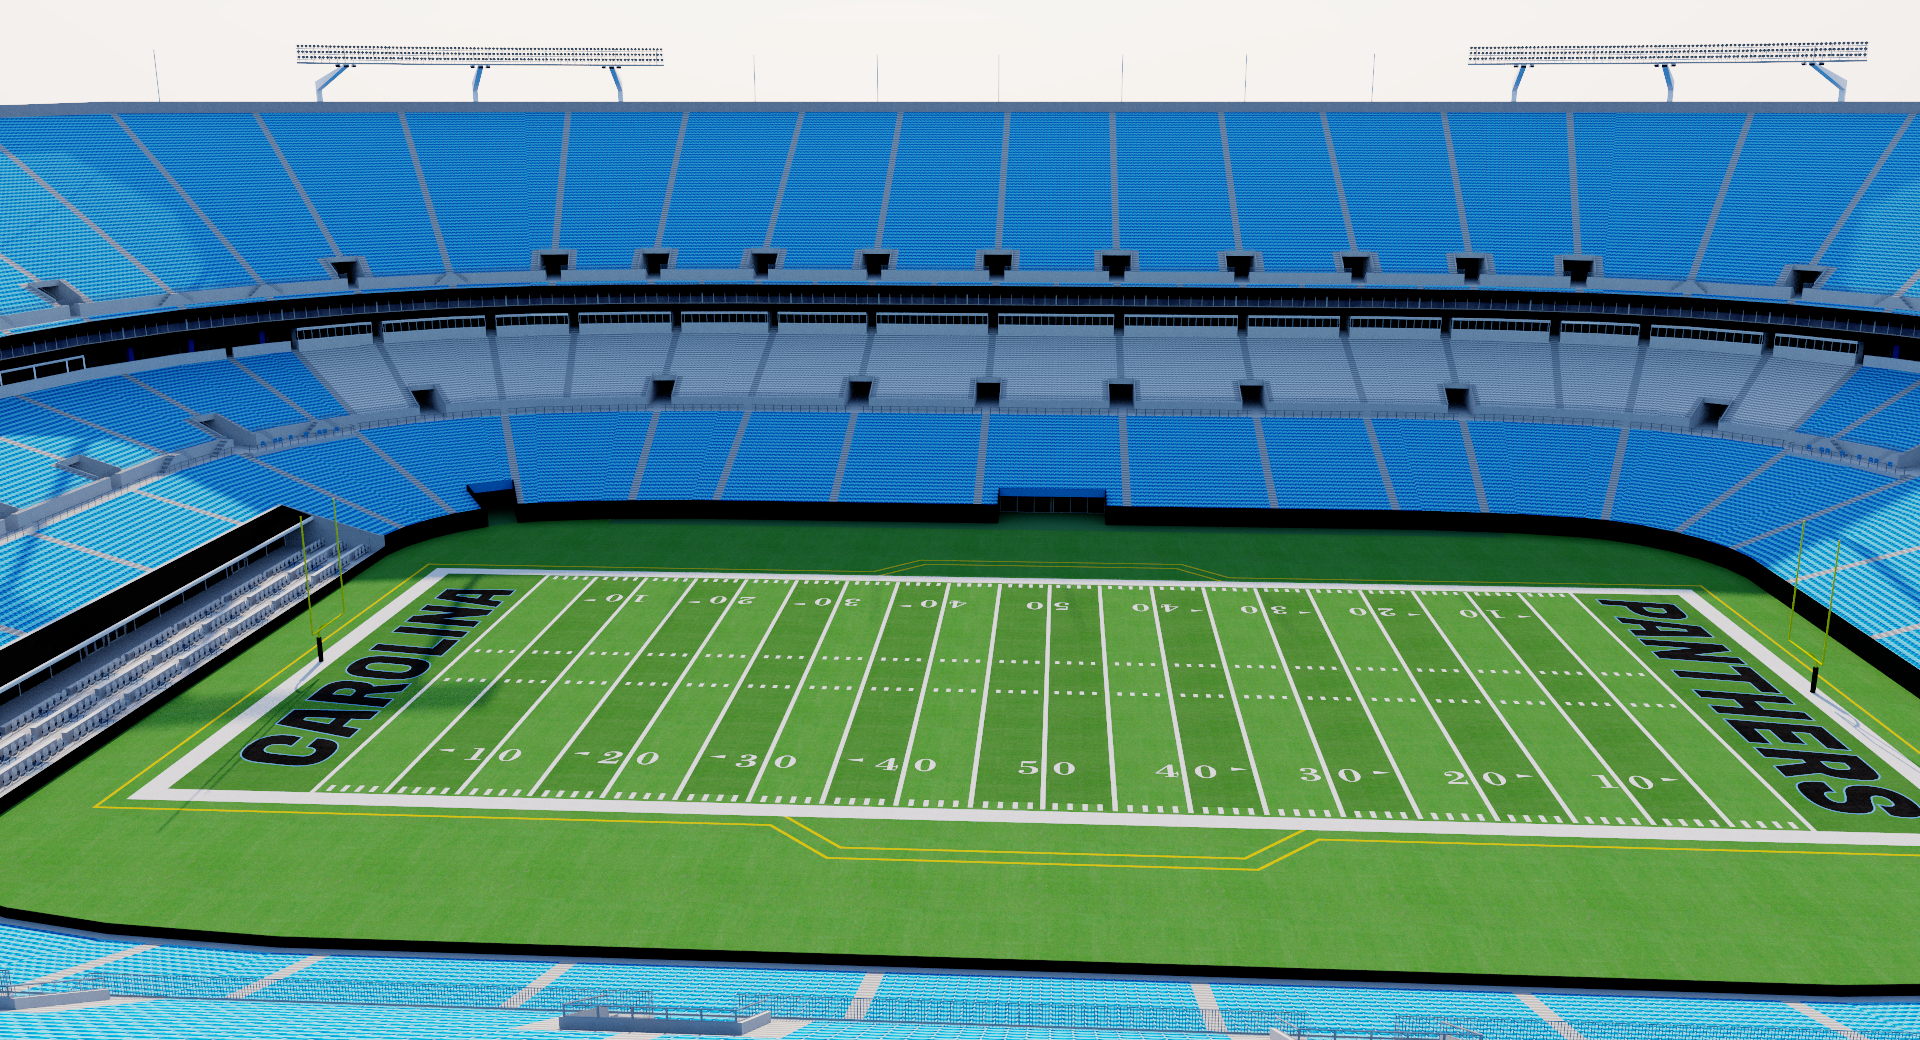 778 Panthers Stadium Images, Stock Photos, 3D objects, & Vectors